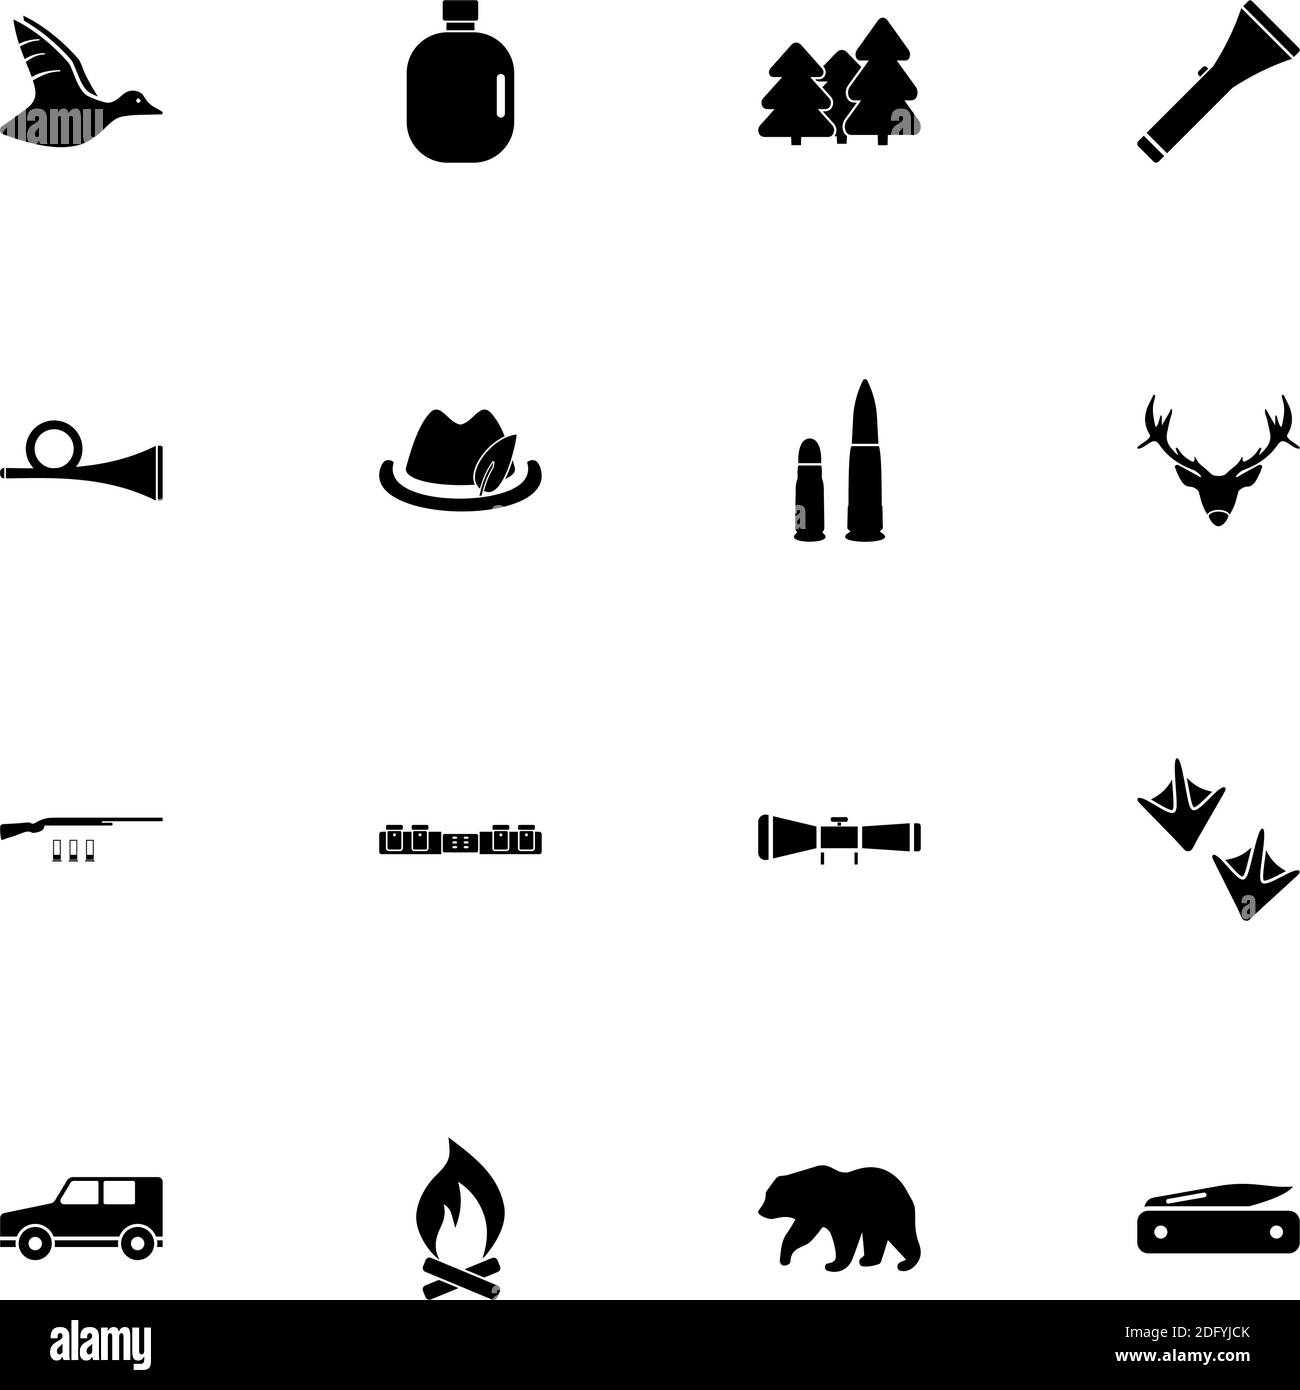 Hunting icon - Expand to any size - Change to any colour. Perfect Flat Vector Contains such Icons as rifle, ammunition, hat, bear, duck, forest, suv c Stock Vector